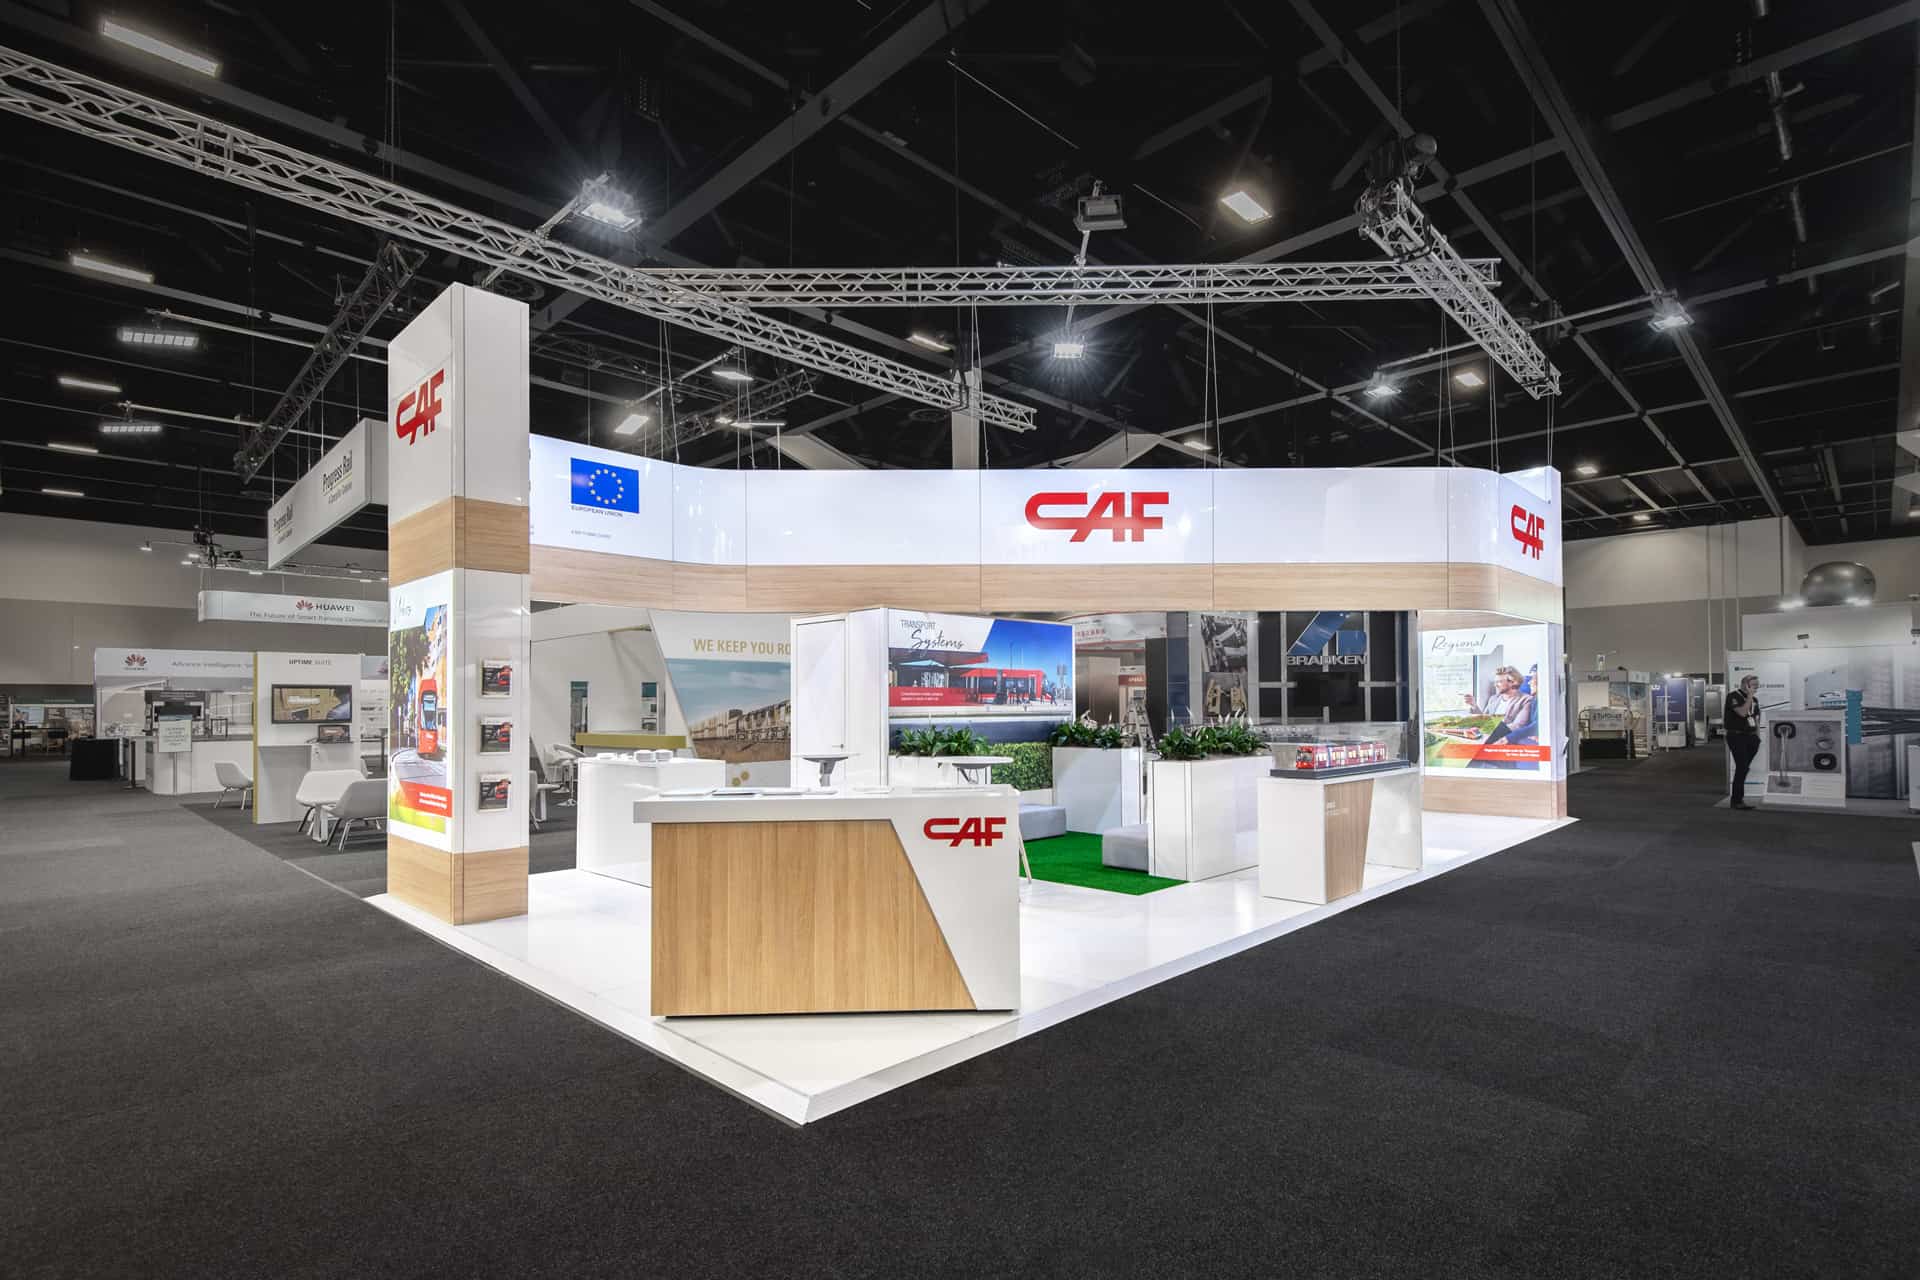 CAF custom exhibition stand at AusRail by Expocentric.com.au